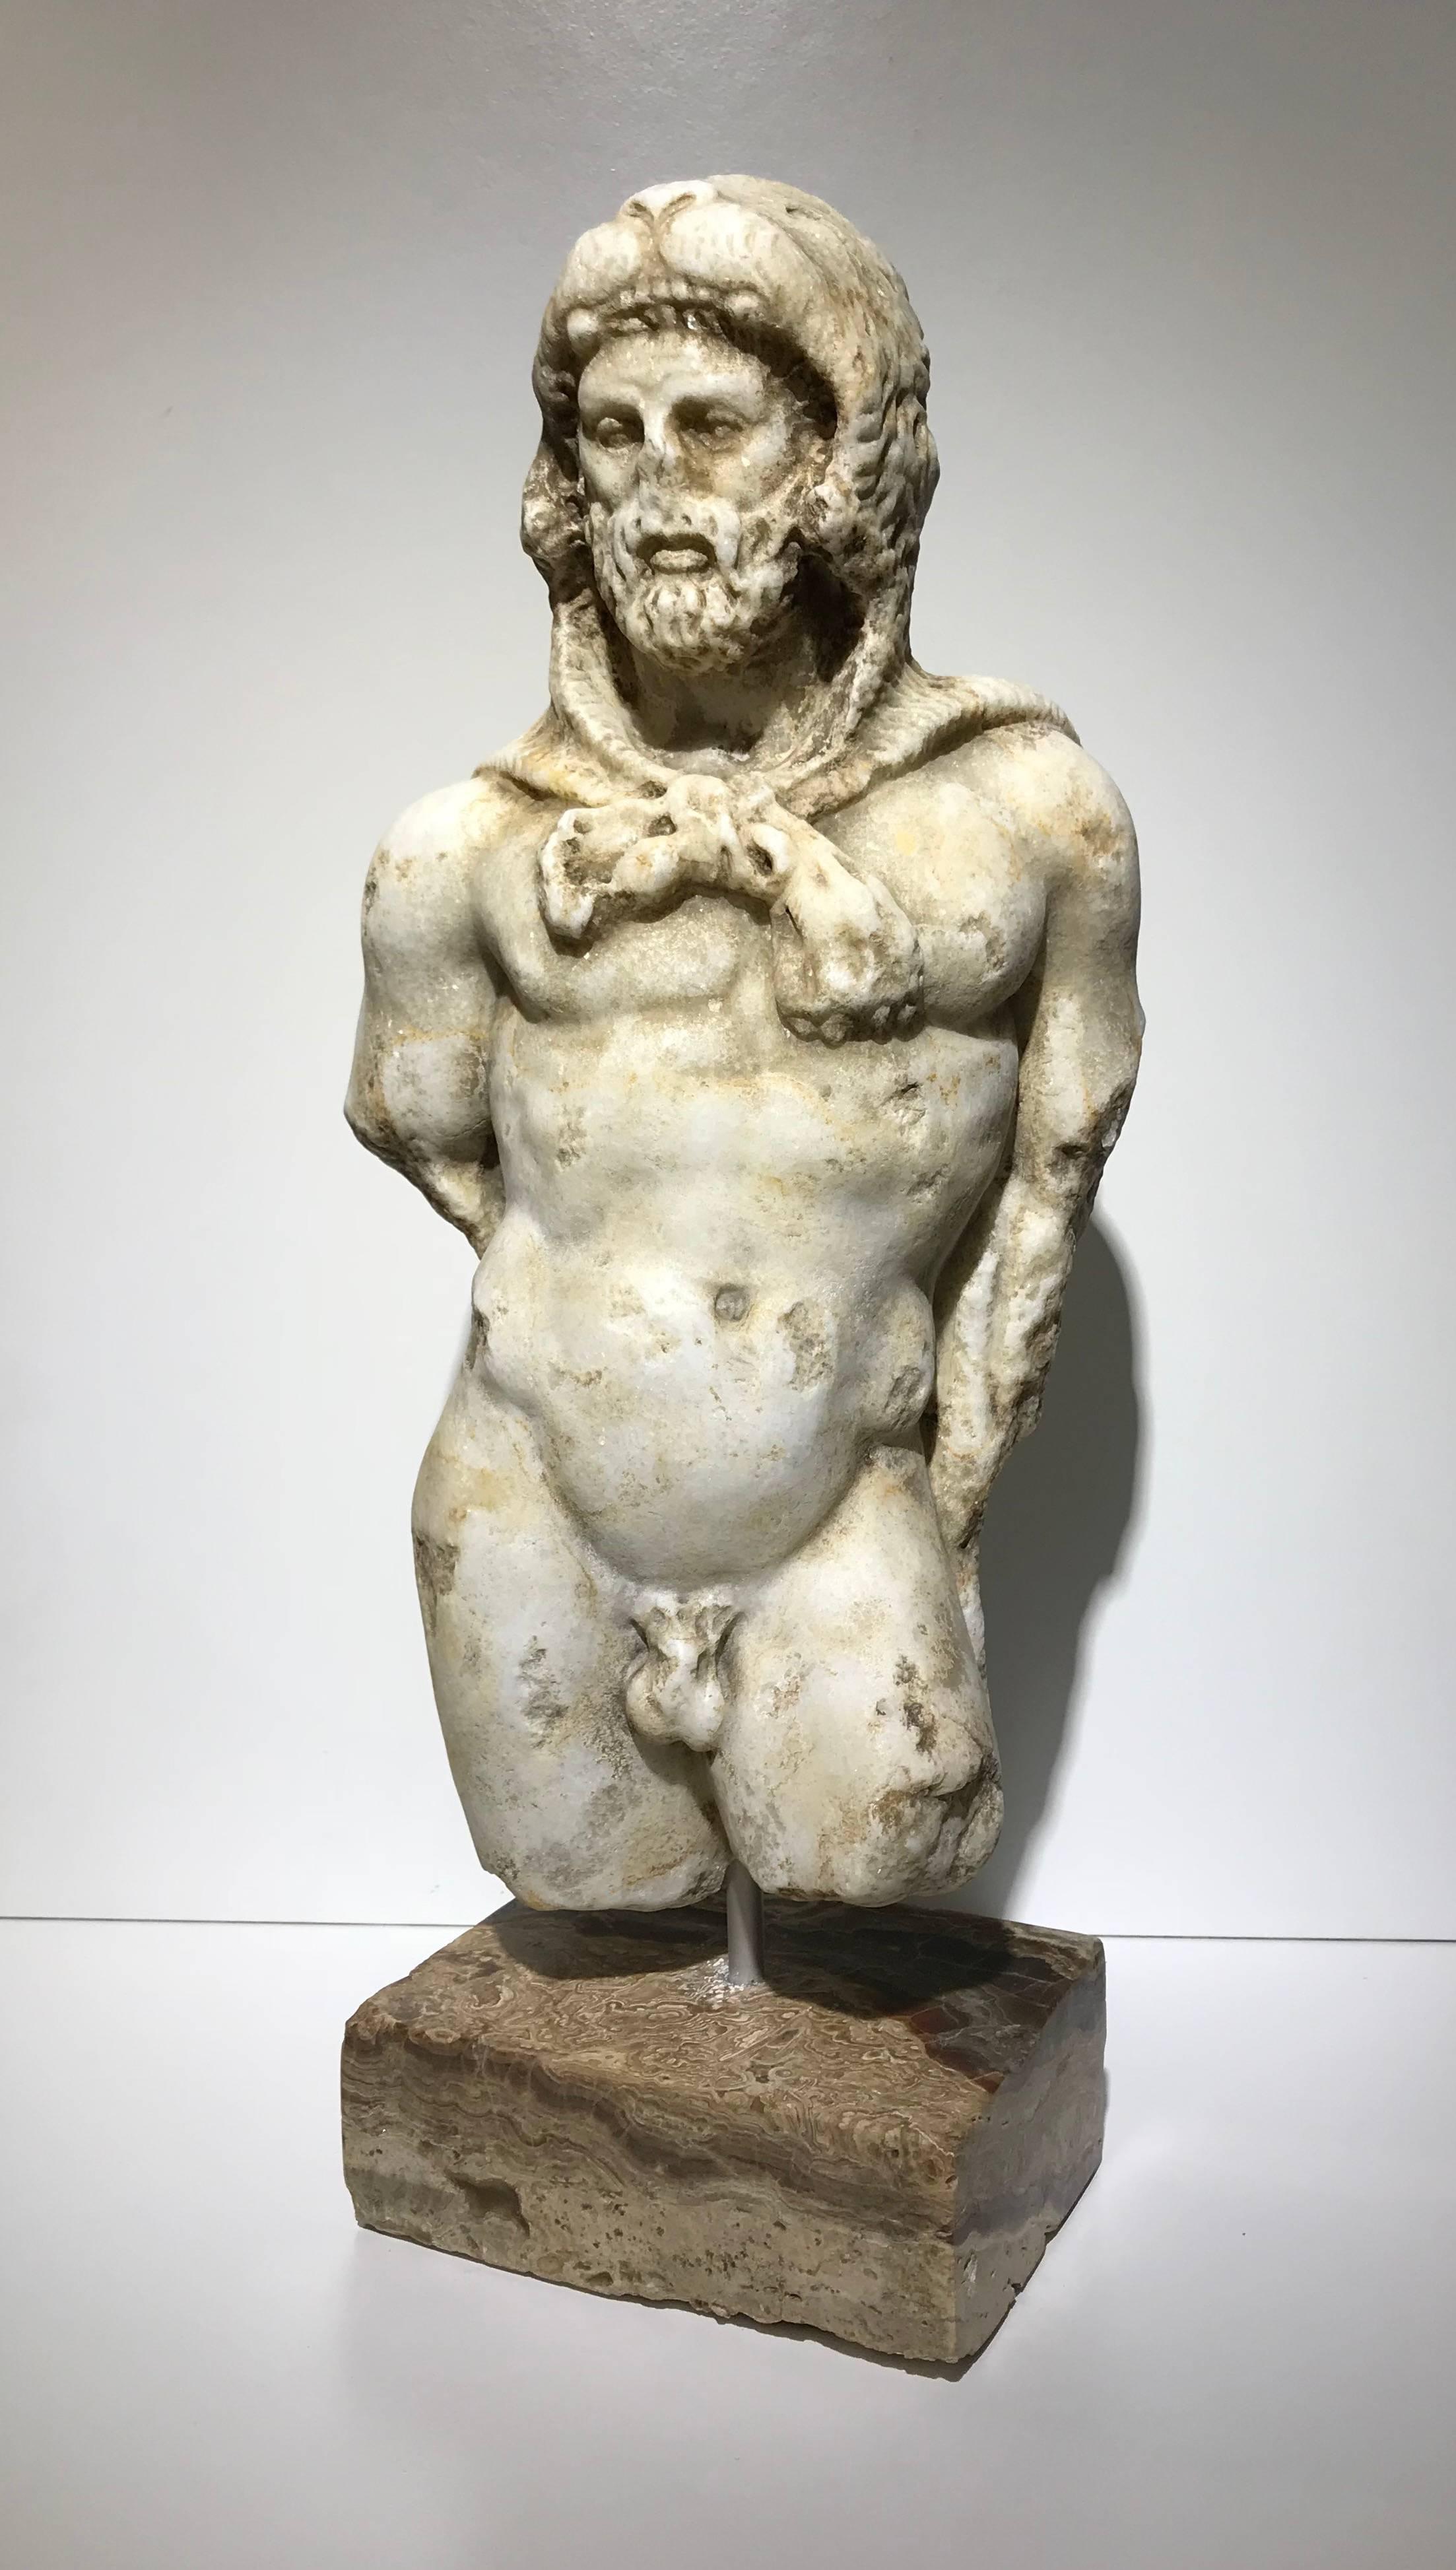 Here, the Roman Emperor has taken on the guise of the mythological hero, Hercules. He has been given the attributes of the hero: the lion skin placed over his head, the club placed in his right hand, and the golden apples of Hesperides in his left.